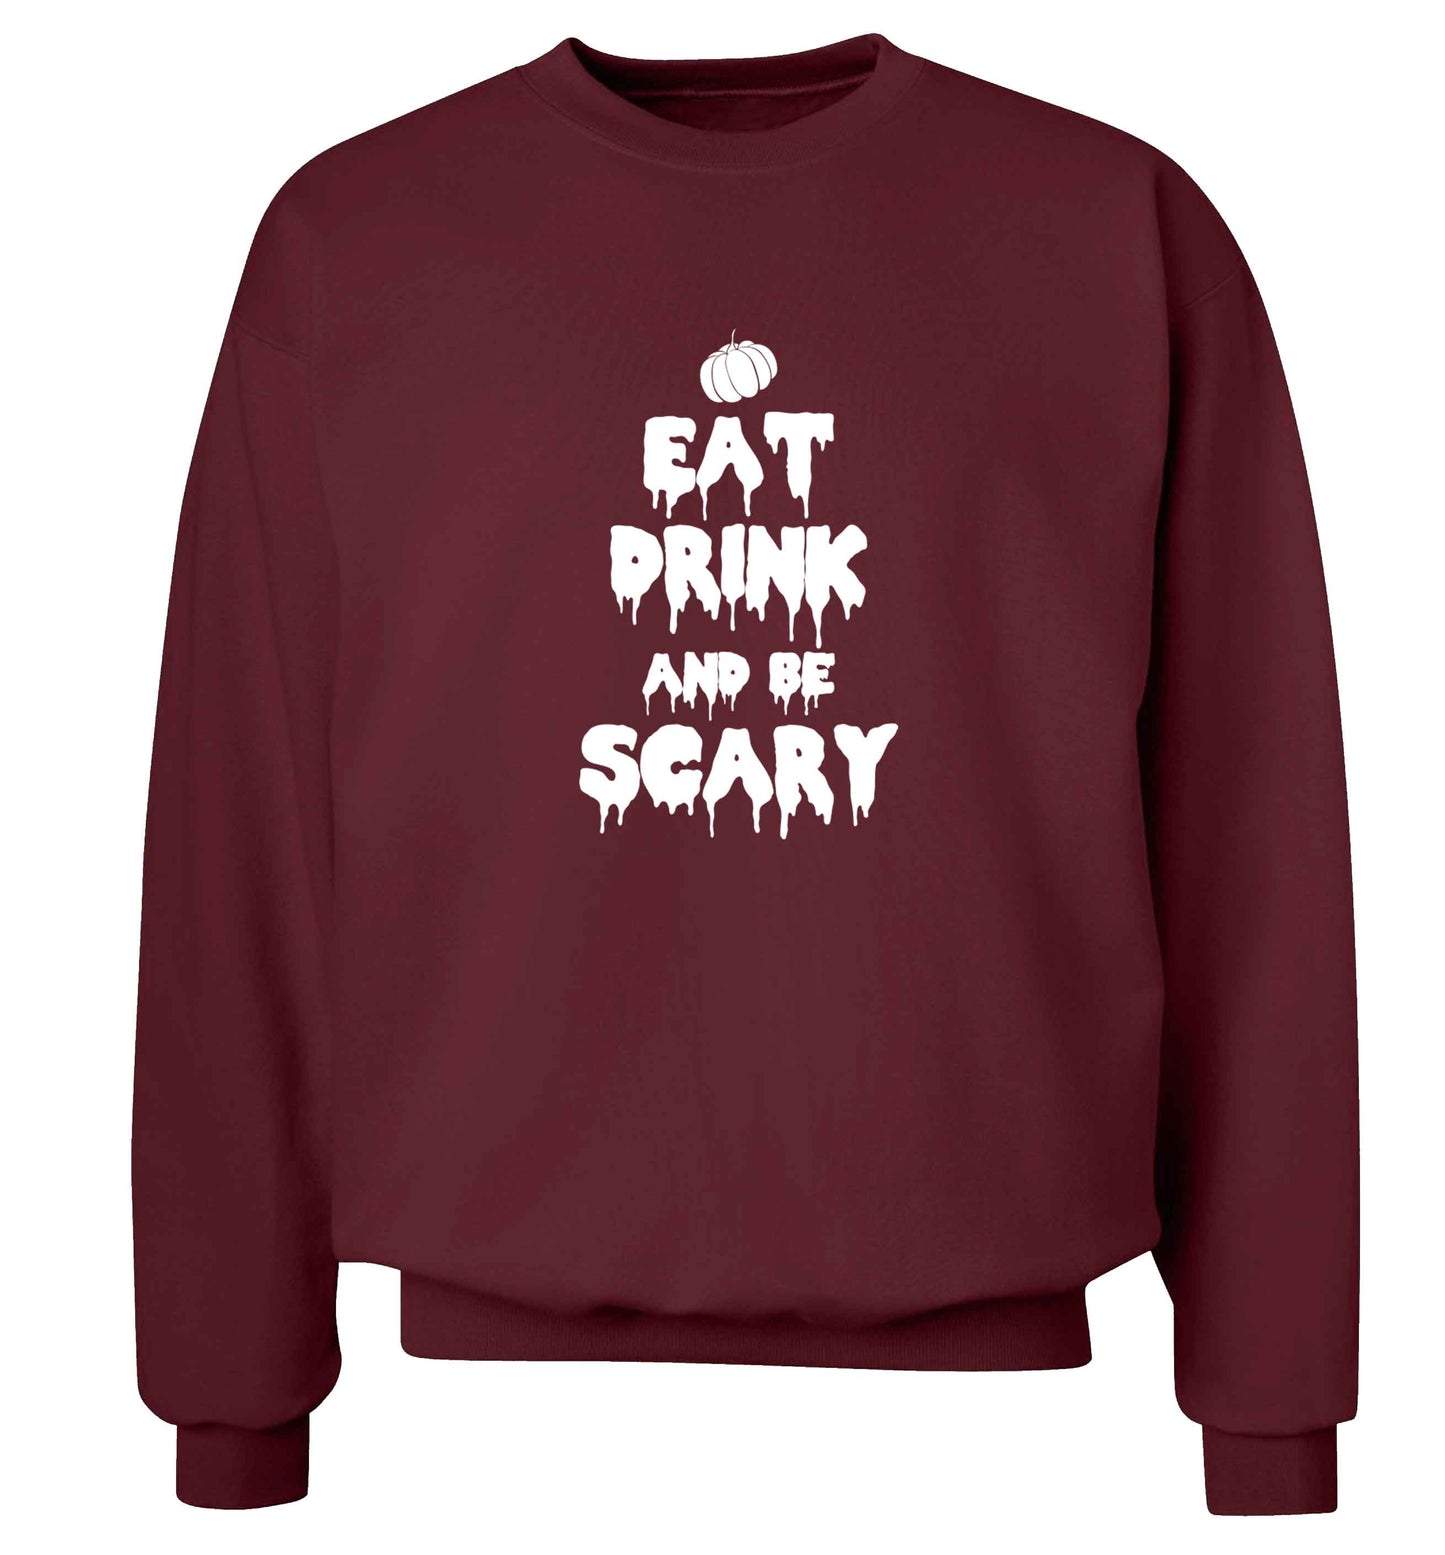 Eat drink and be scary adult's unisex maroon sweater 2XL